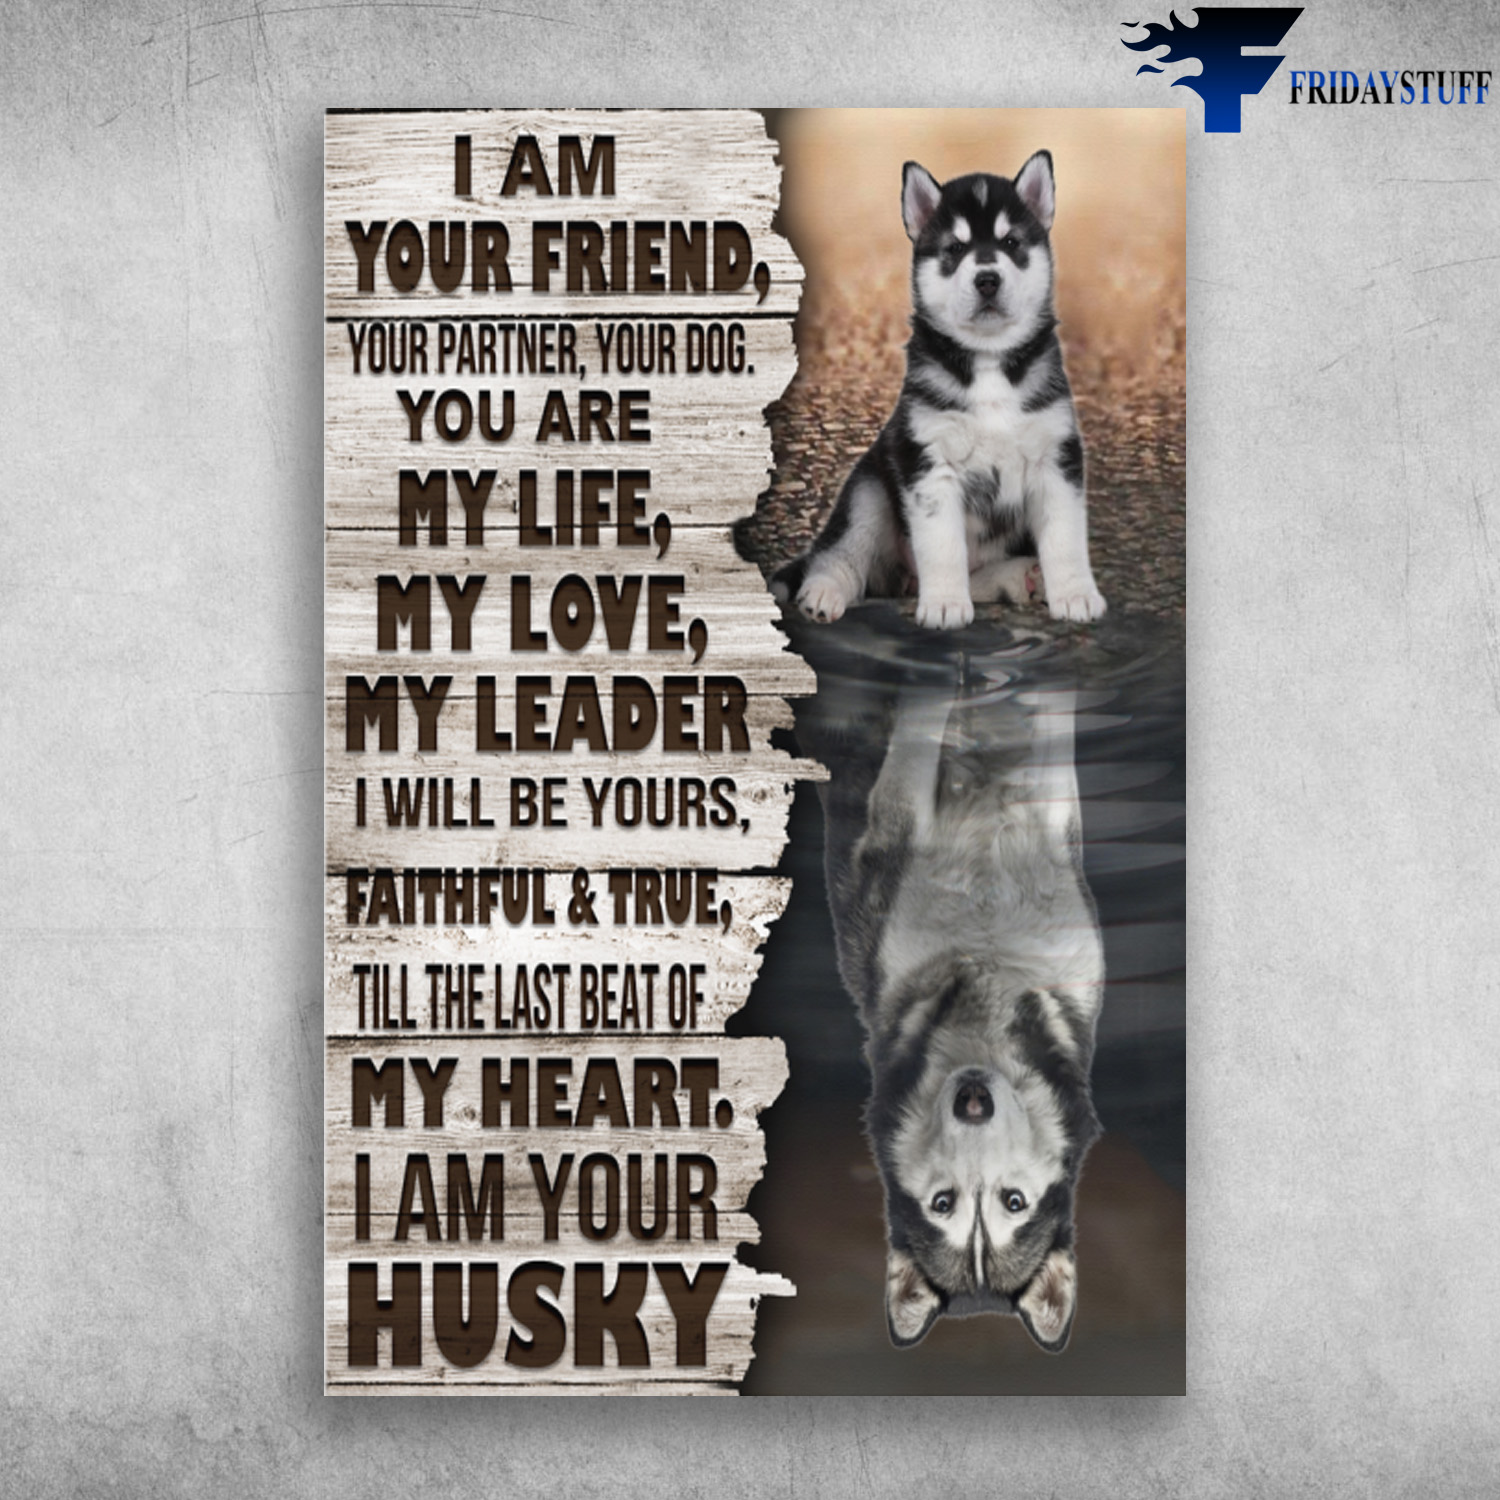 Husky Dog - I Am Your Friend, Your Partner, Your Dog, You Are My Life, My Love, My Leader, I Will Be Yours, Faithful And True, Till The Last Beat Of My Heart, I Am Your Husky